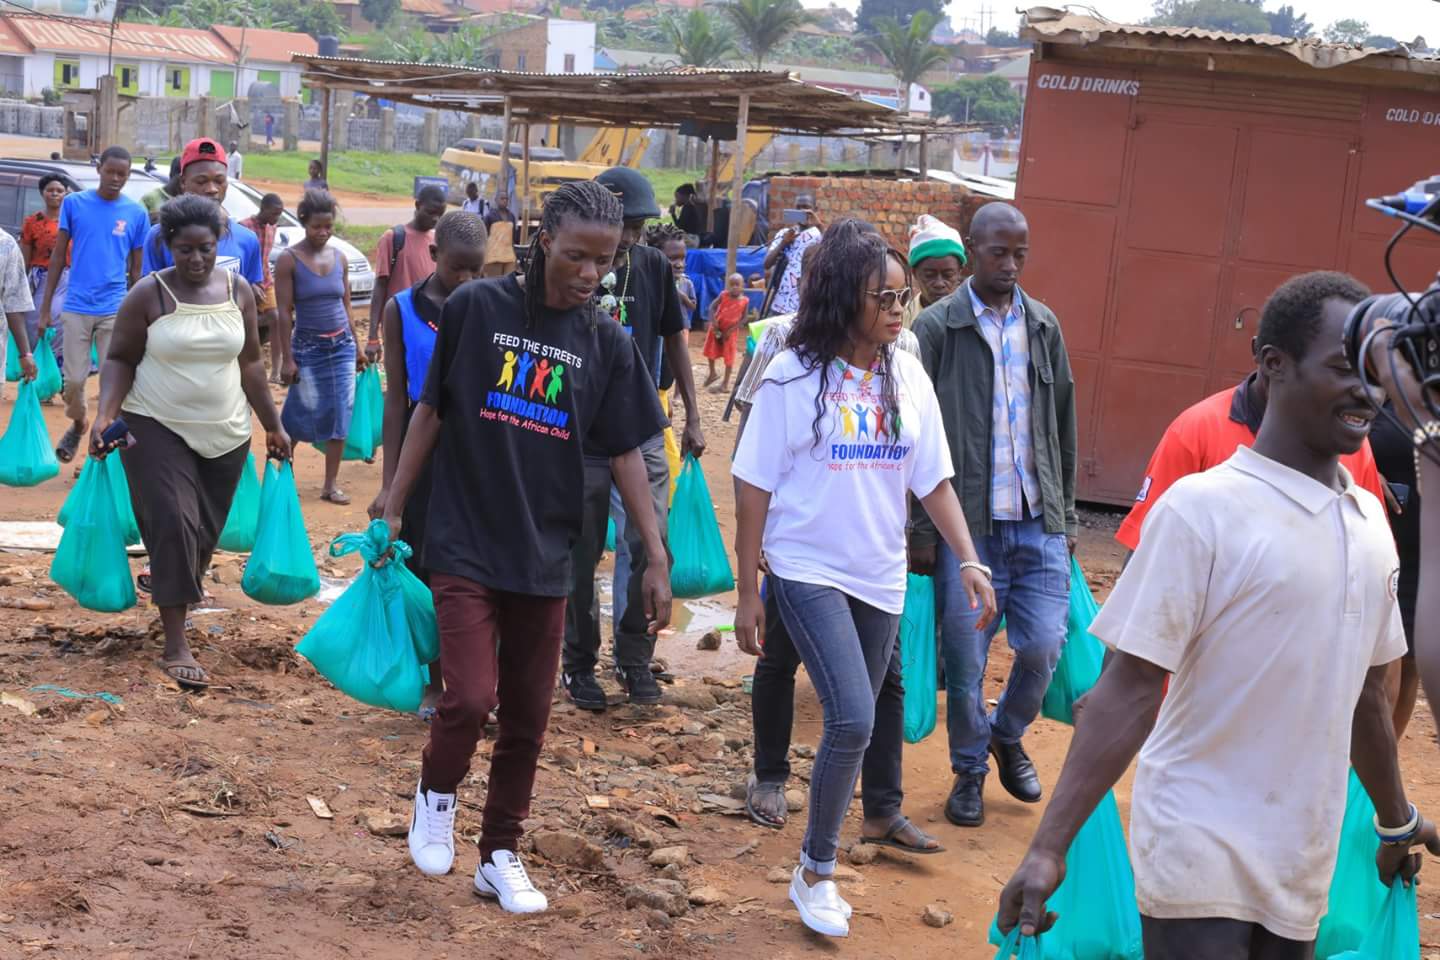 Grace Nakimera on Charity Move with Feed The Streets Foundation